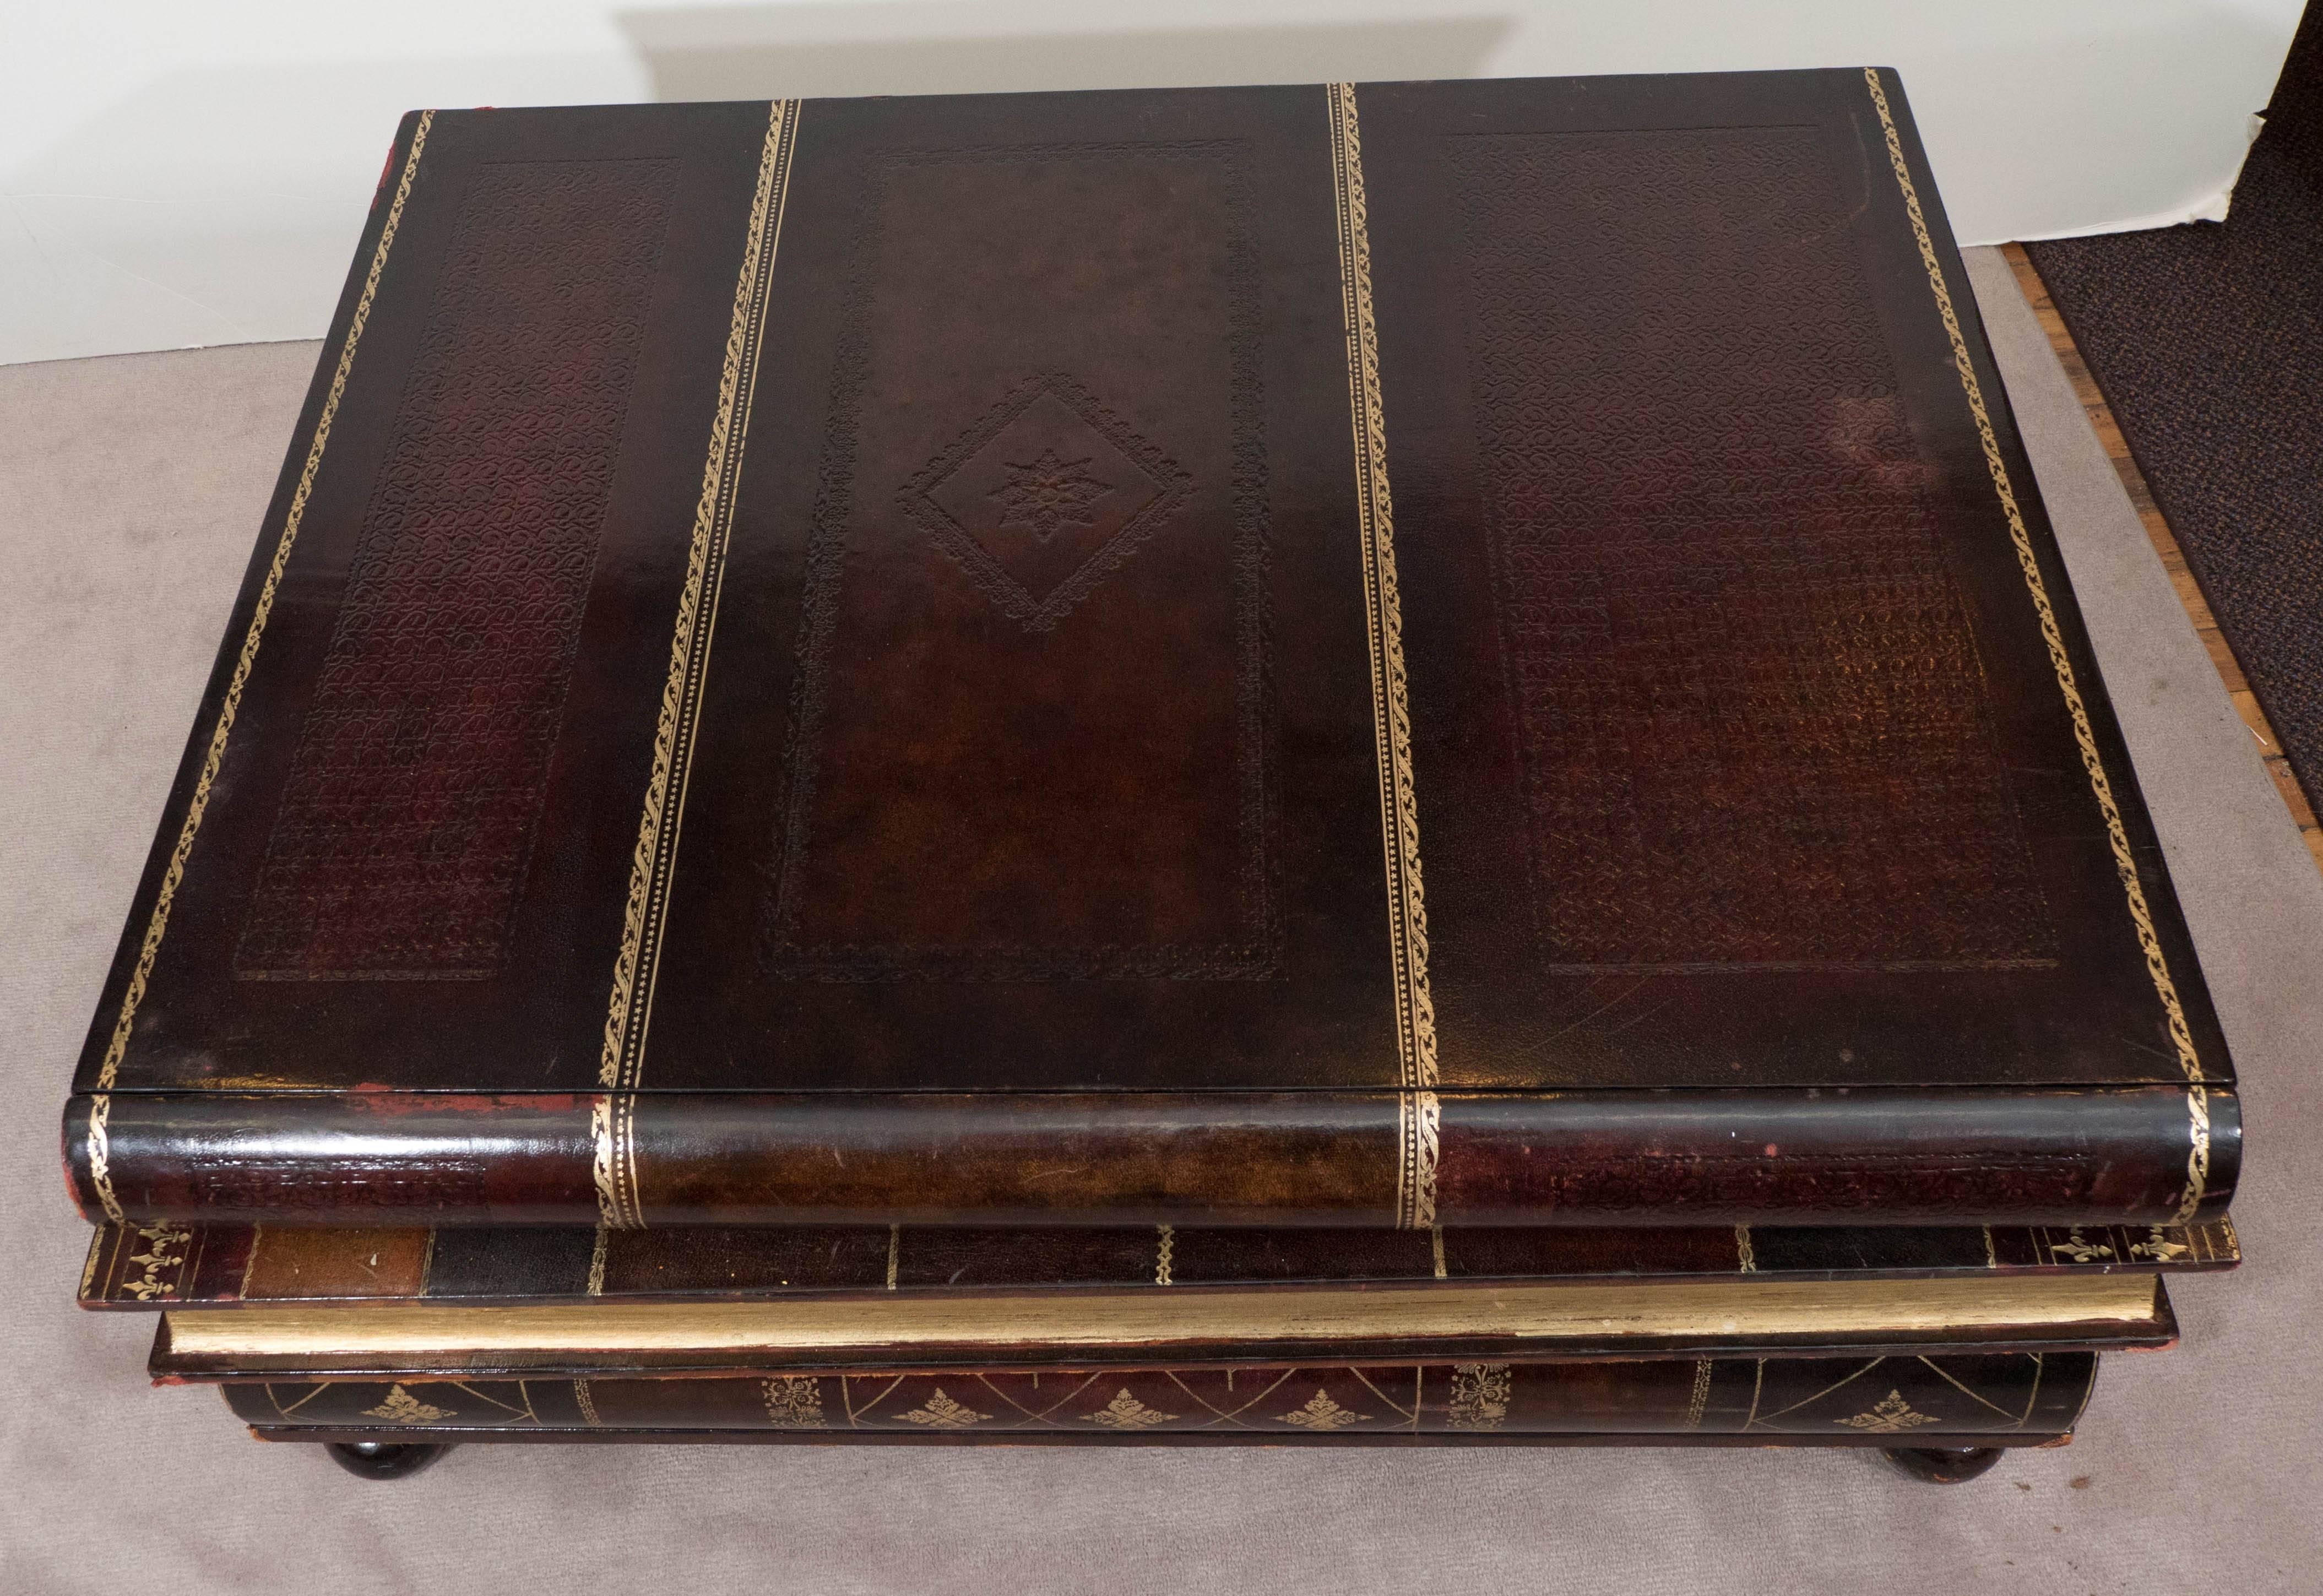 A coffee table by Maitland-Smith, produced circa 1980s-1990s, designed as a stack of three leather embossed and gilded books, over round feet; includes three drawers, concealed as the spine of each book, the interior lined with marbled paper.